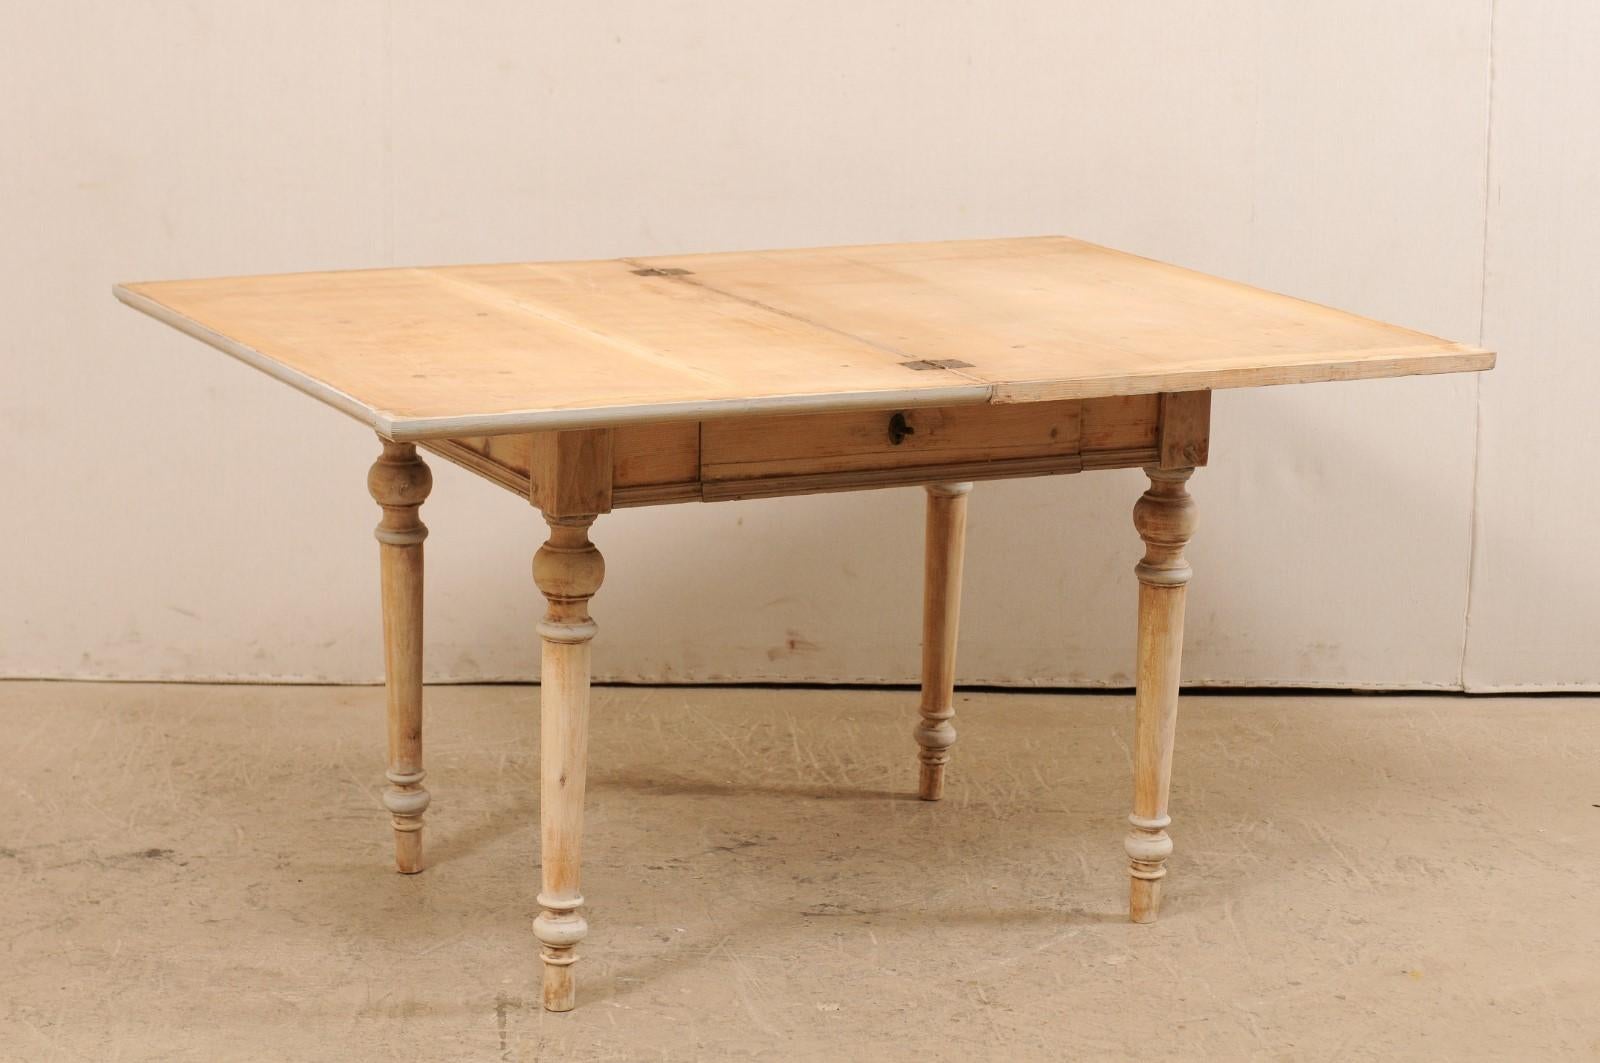 Wood Antique Swedish Table with Expandable Top